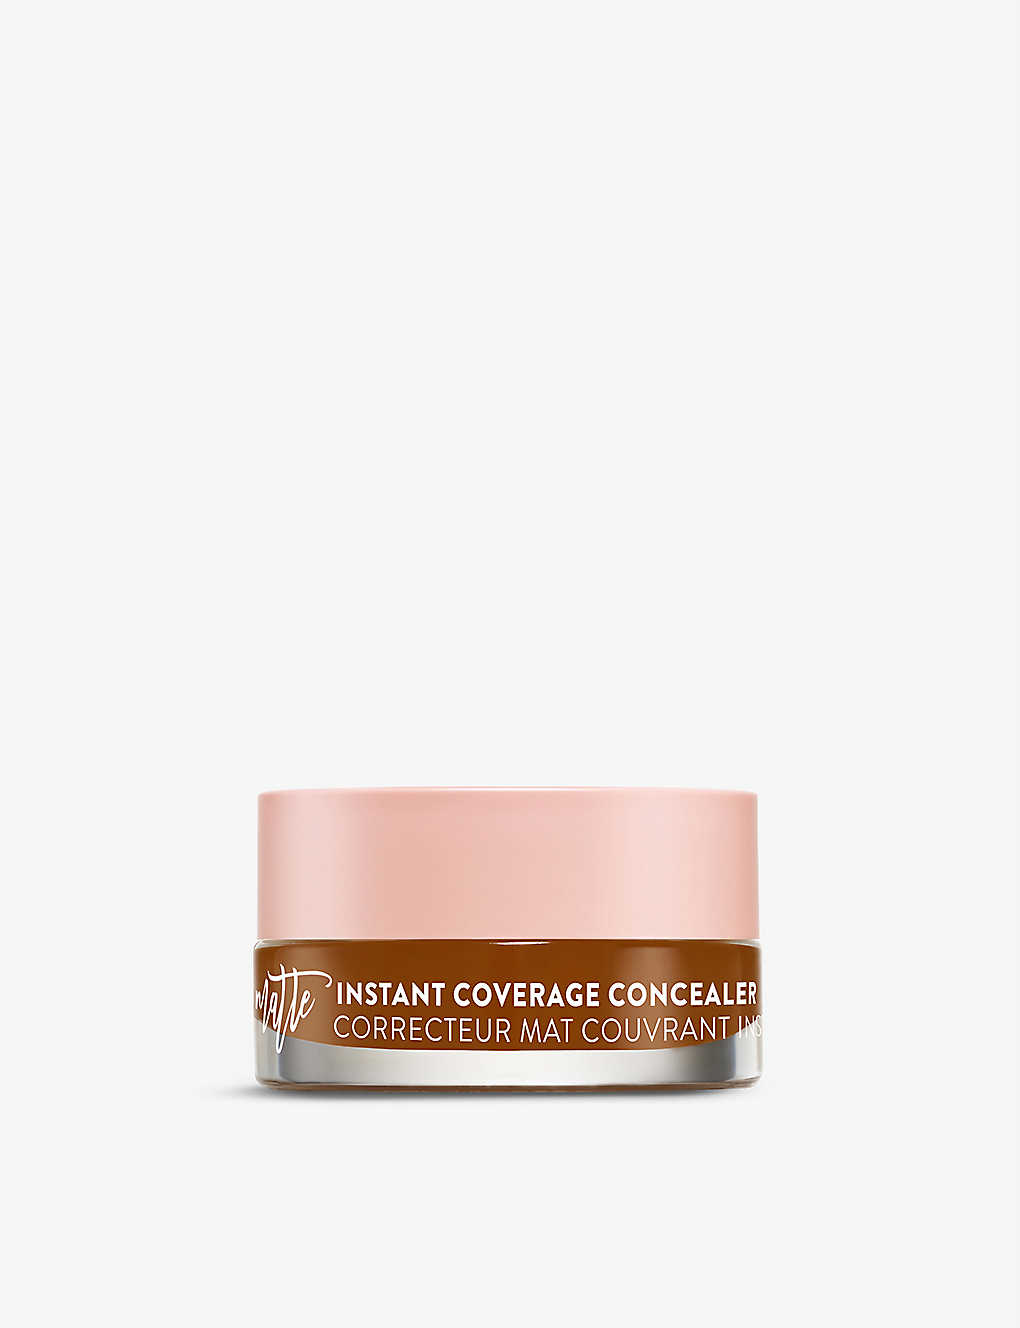 Too Faced Peach Perfect Instant Coverage Concealer 7g In Eclair